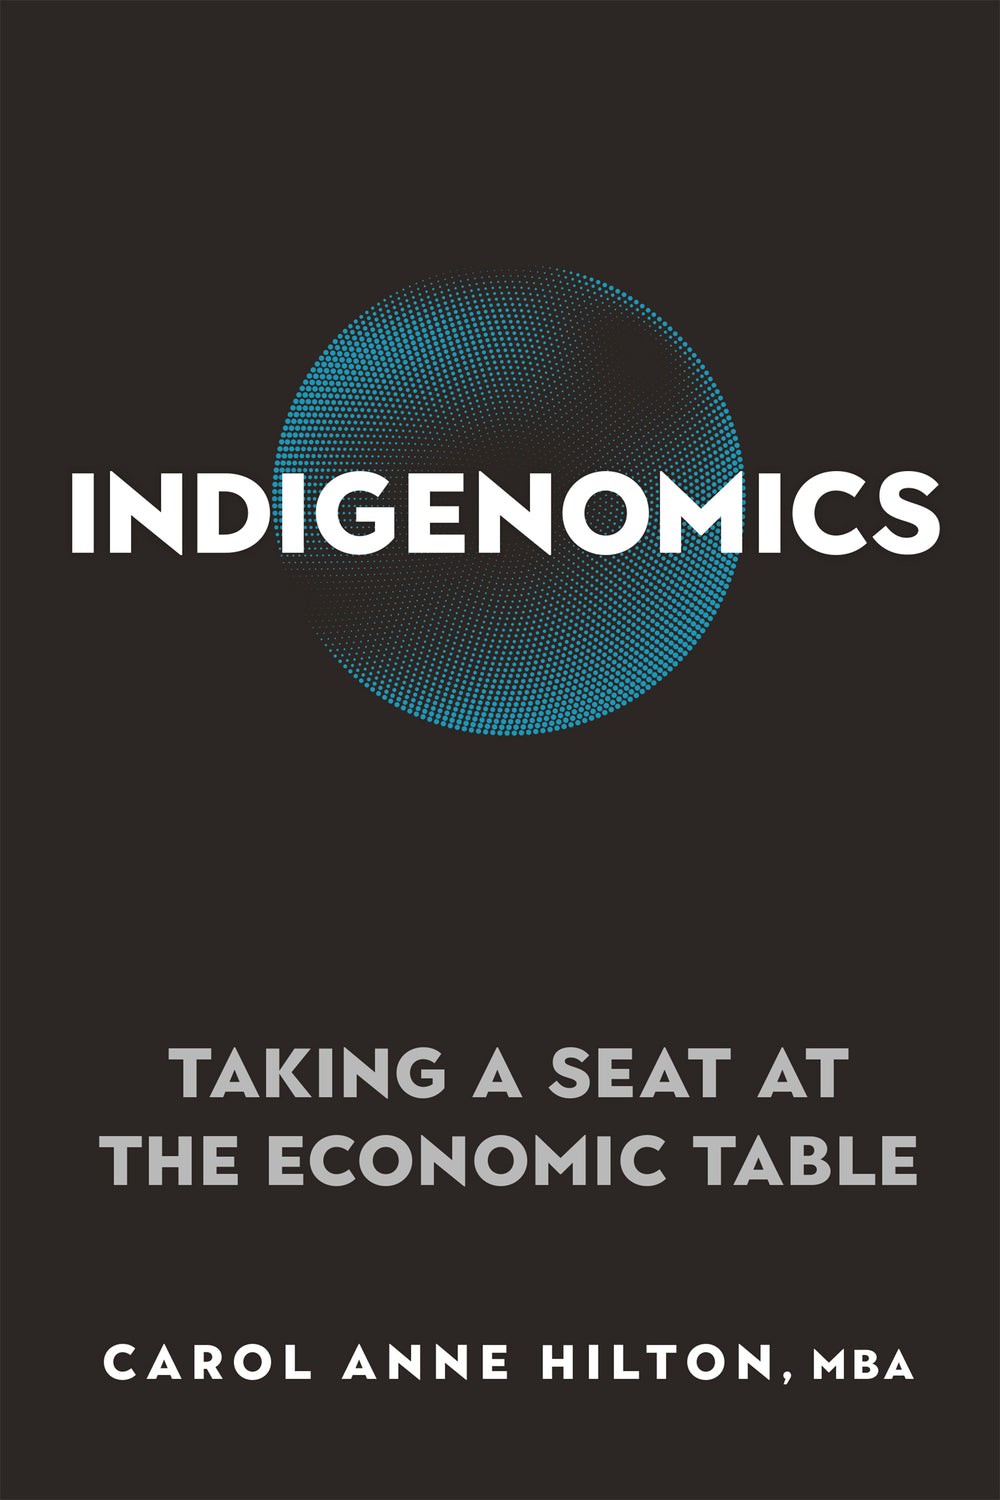 Indigenomics – Taking a Seat at the Economic Table, by Carol Anne Hilton